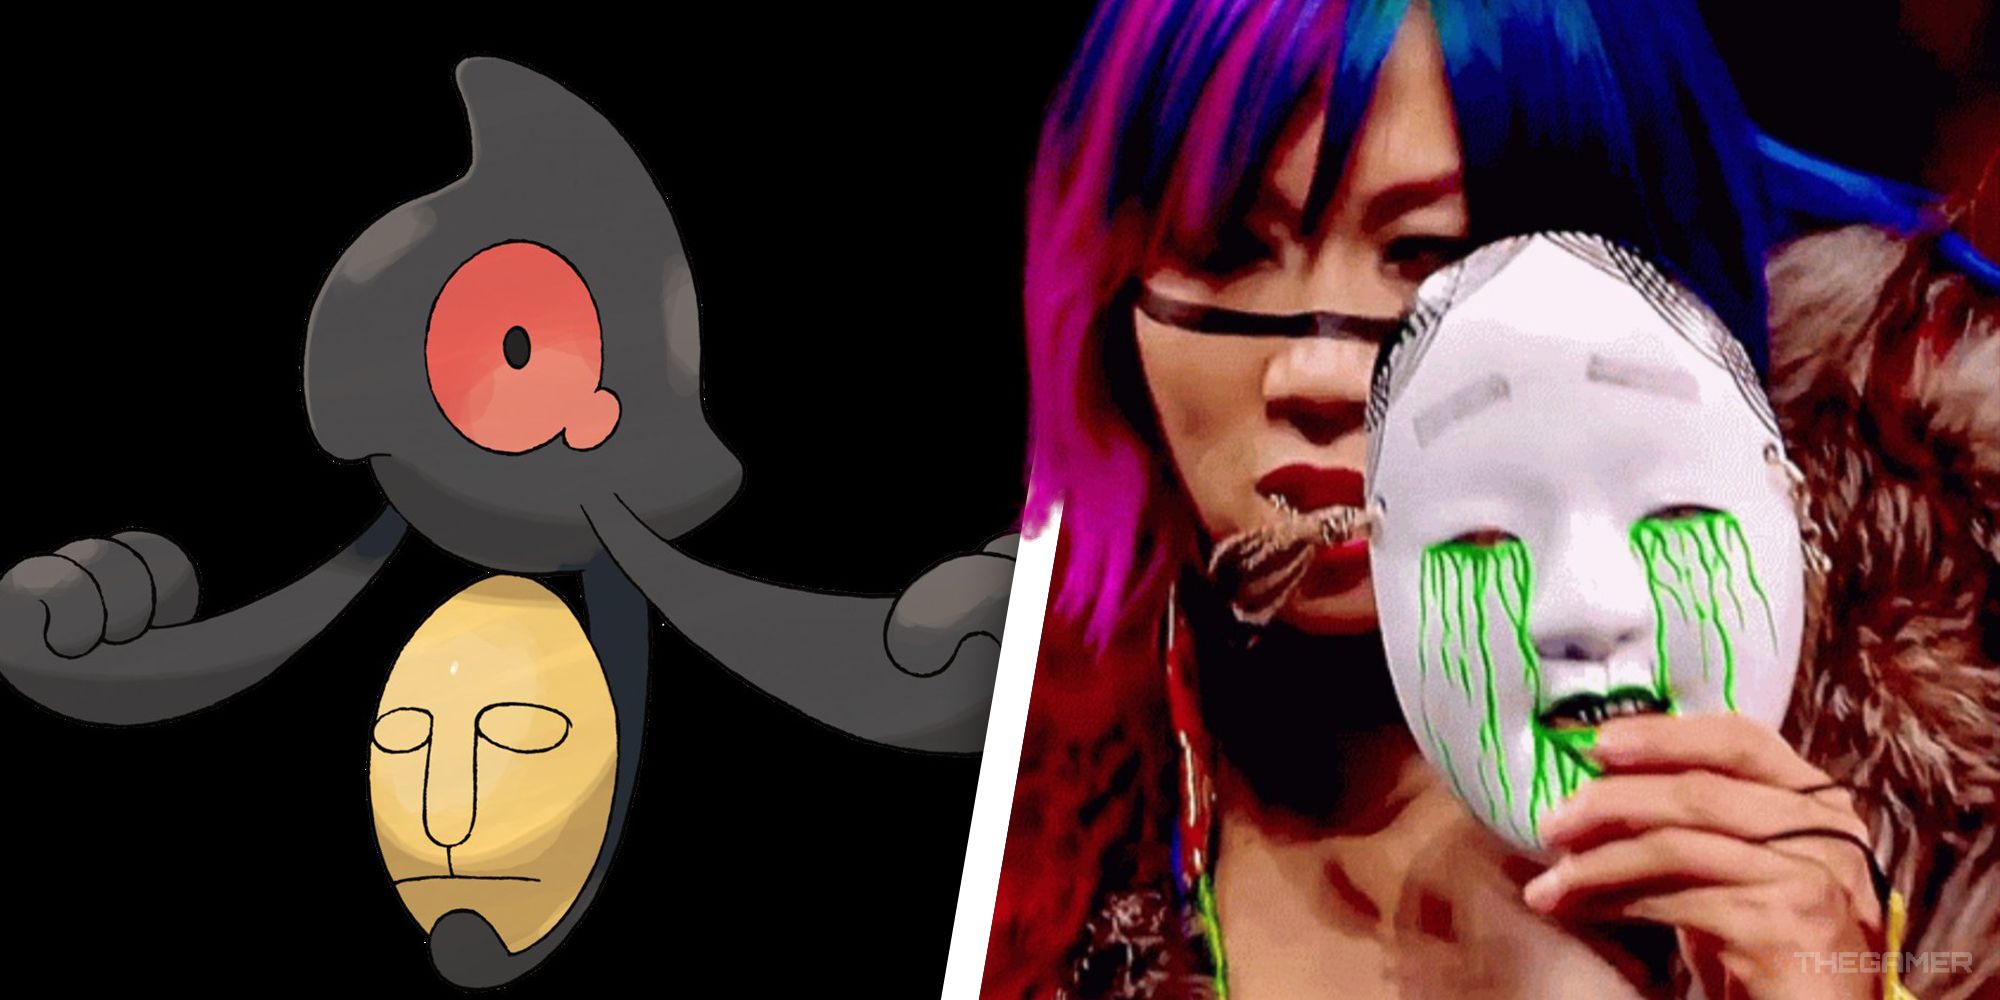 Heres 30 Wrestlers As Pokemon For The Royal Rumble (1)